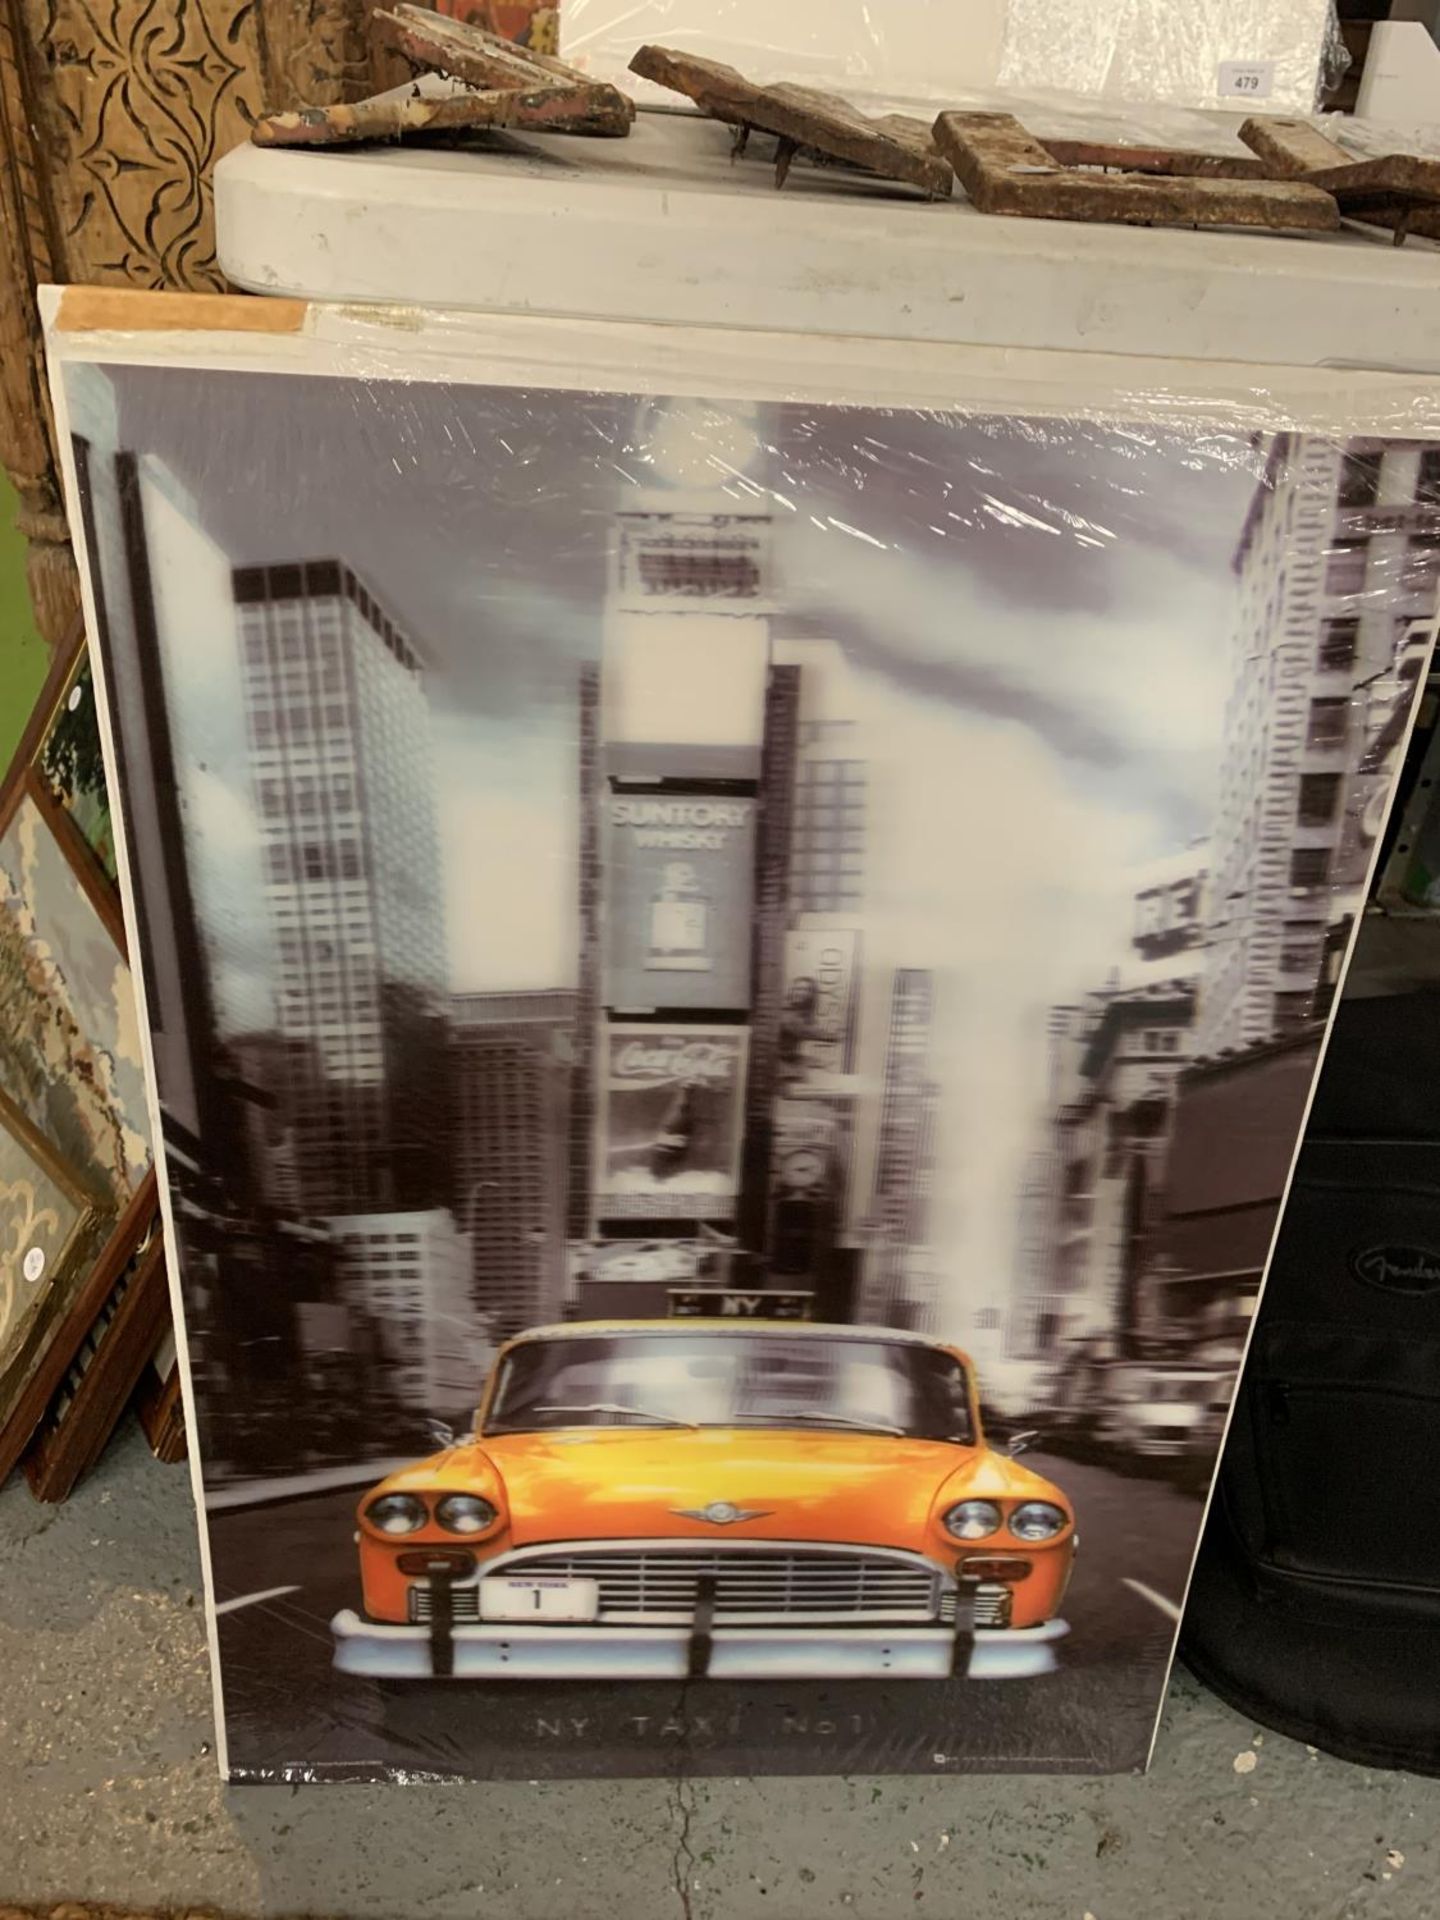 A 3D EFFECT PICTURE OF NEW YORK AND A YELLOW CAB